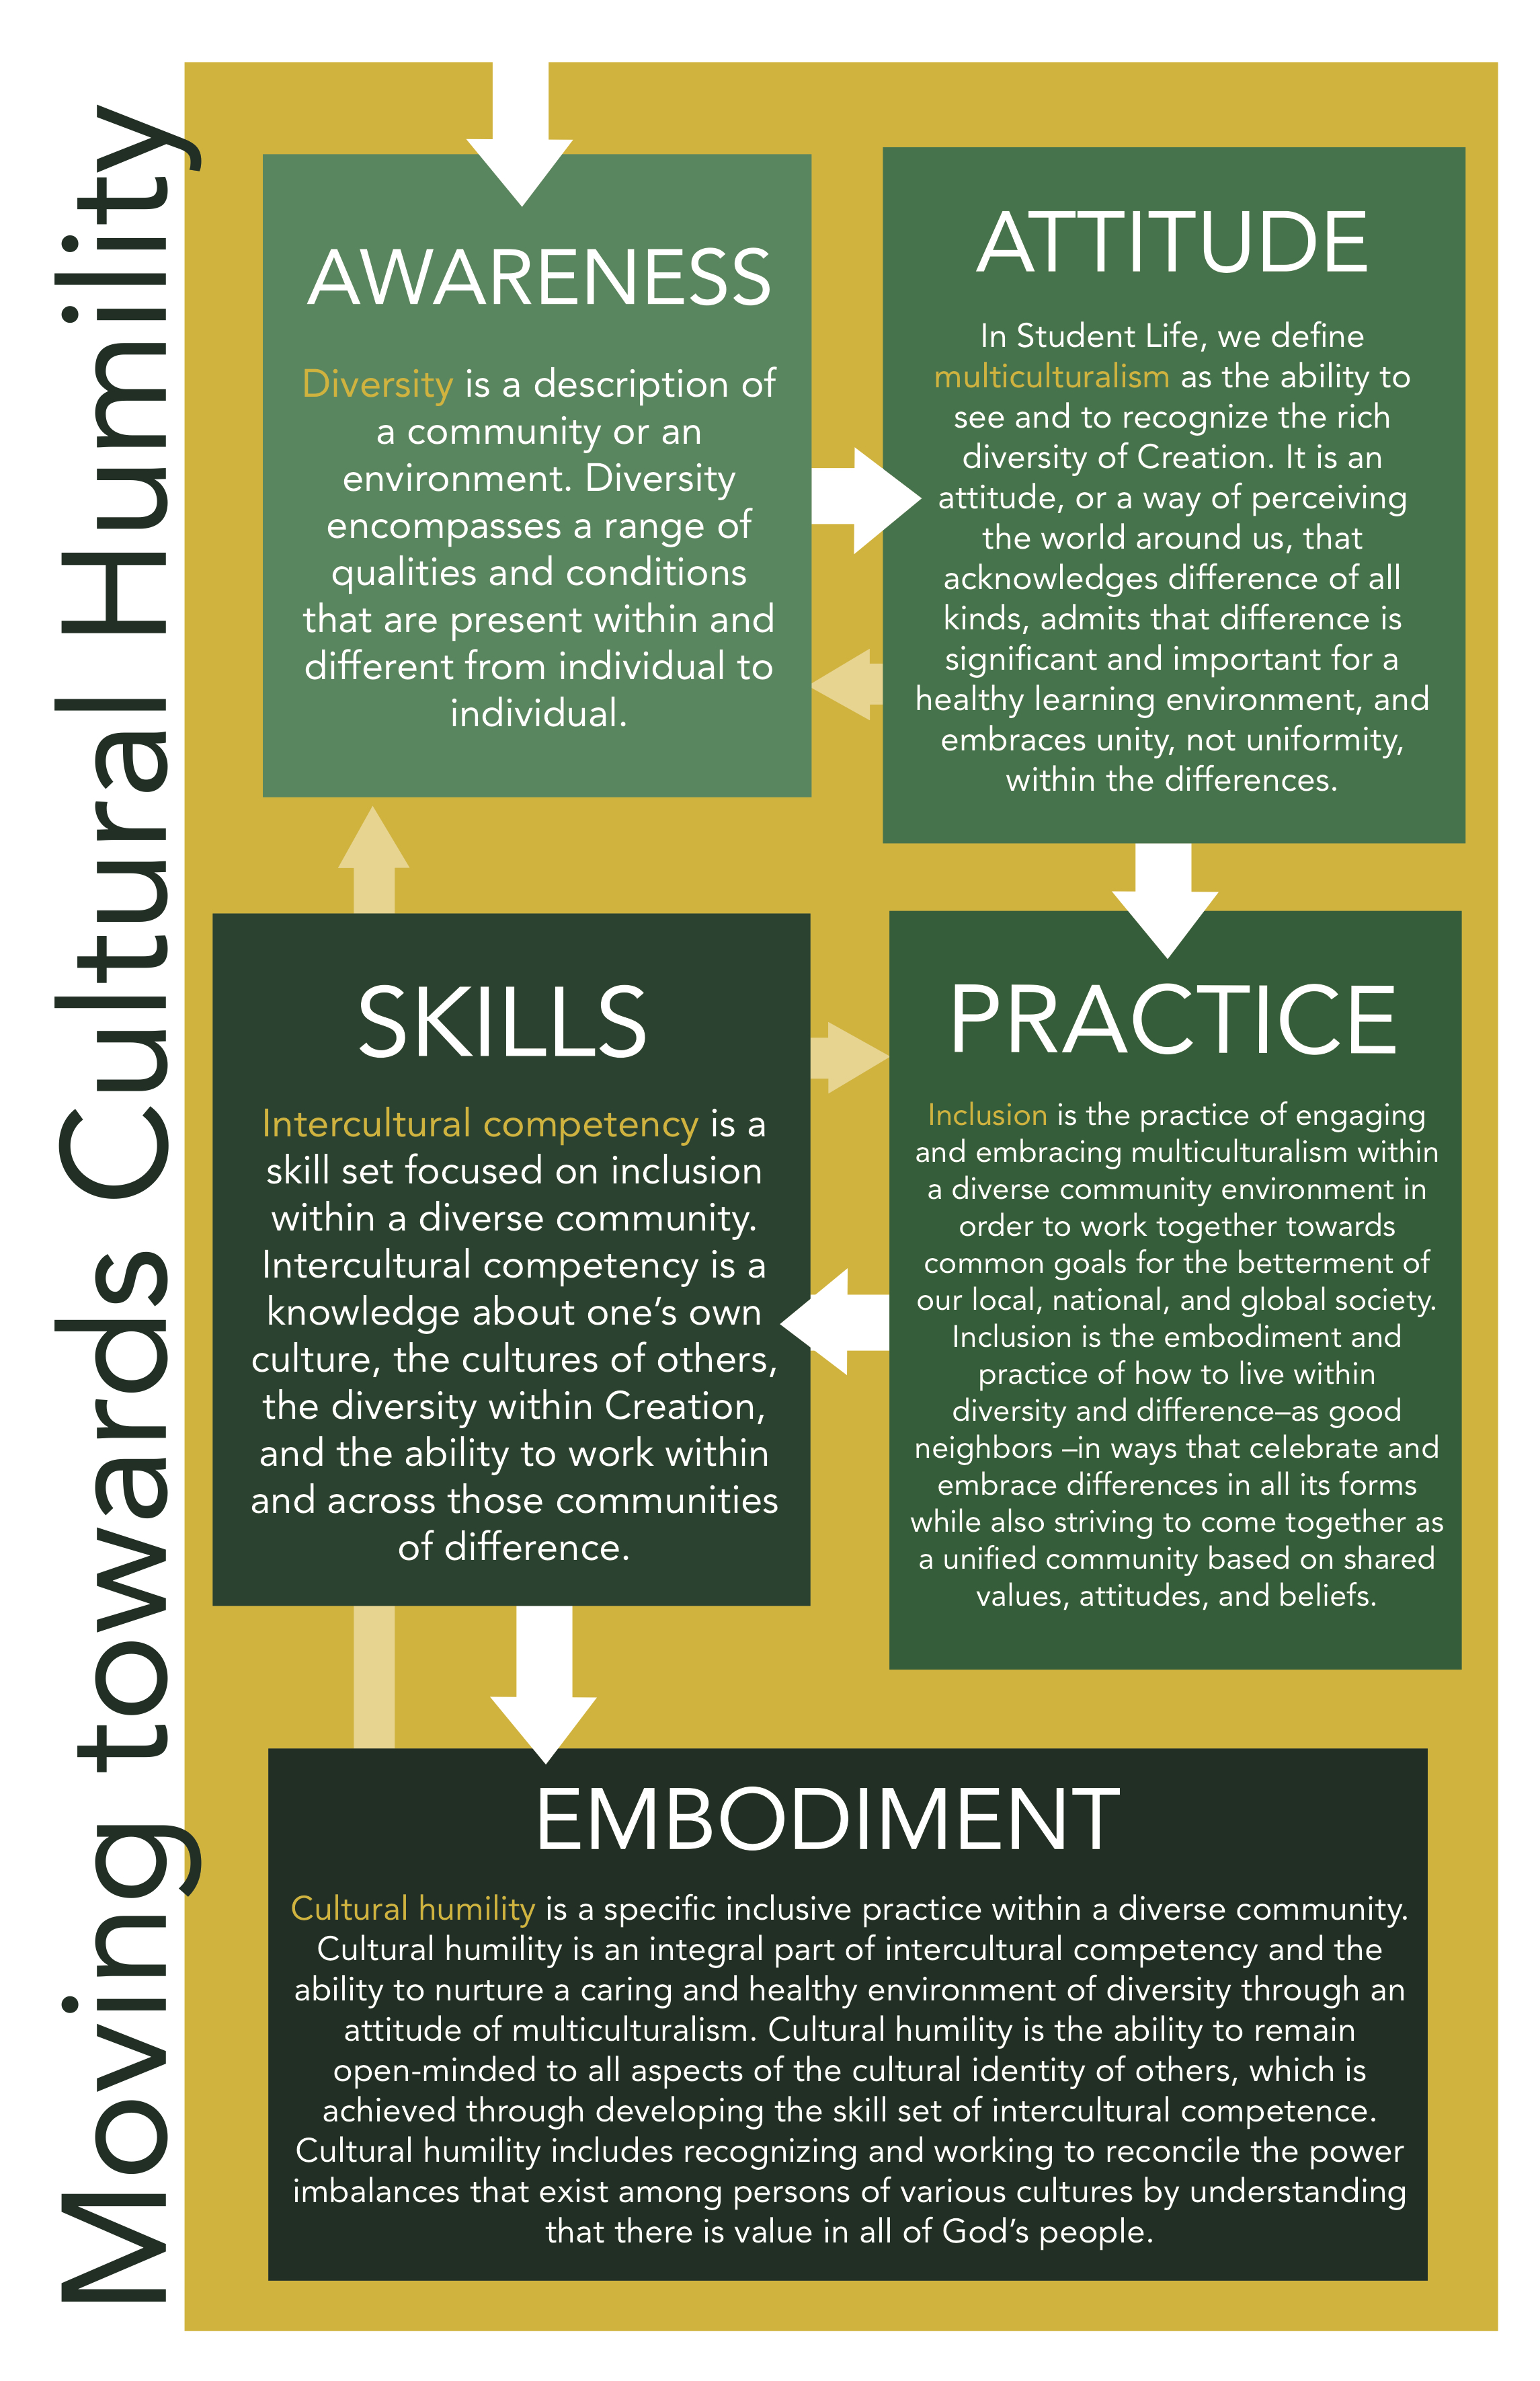 Flow chart illustrating the 4-step process of awareness, attitude, practice, and skills related to cultural humility